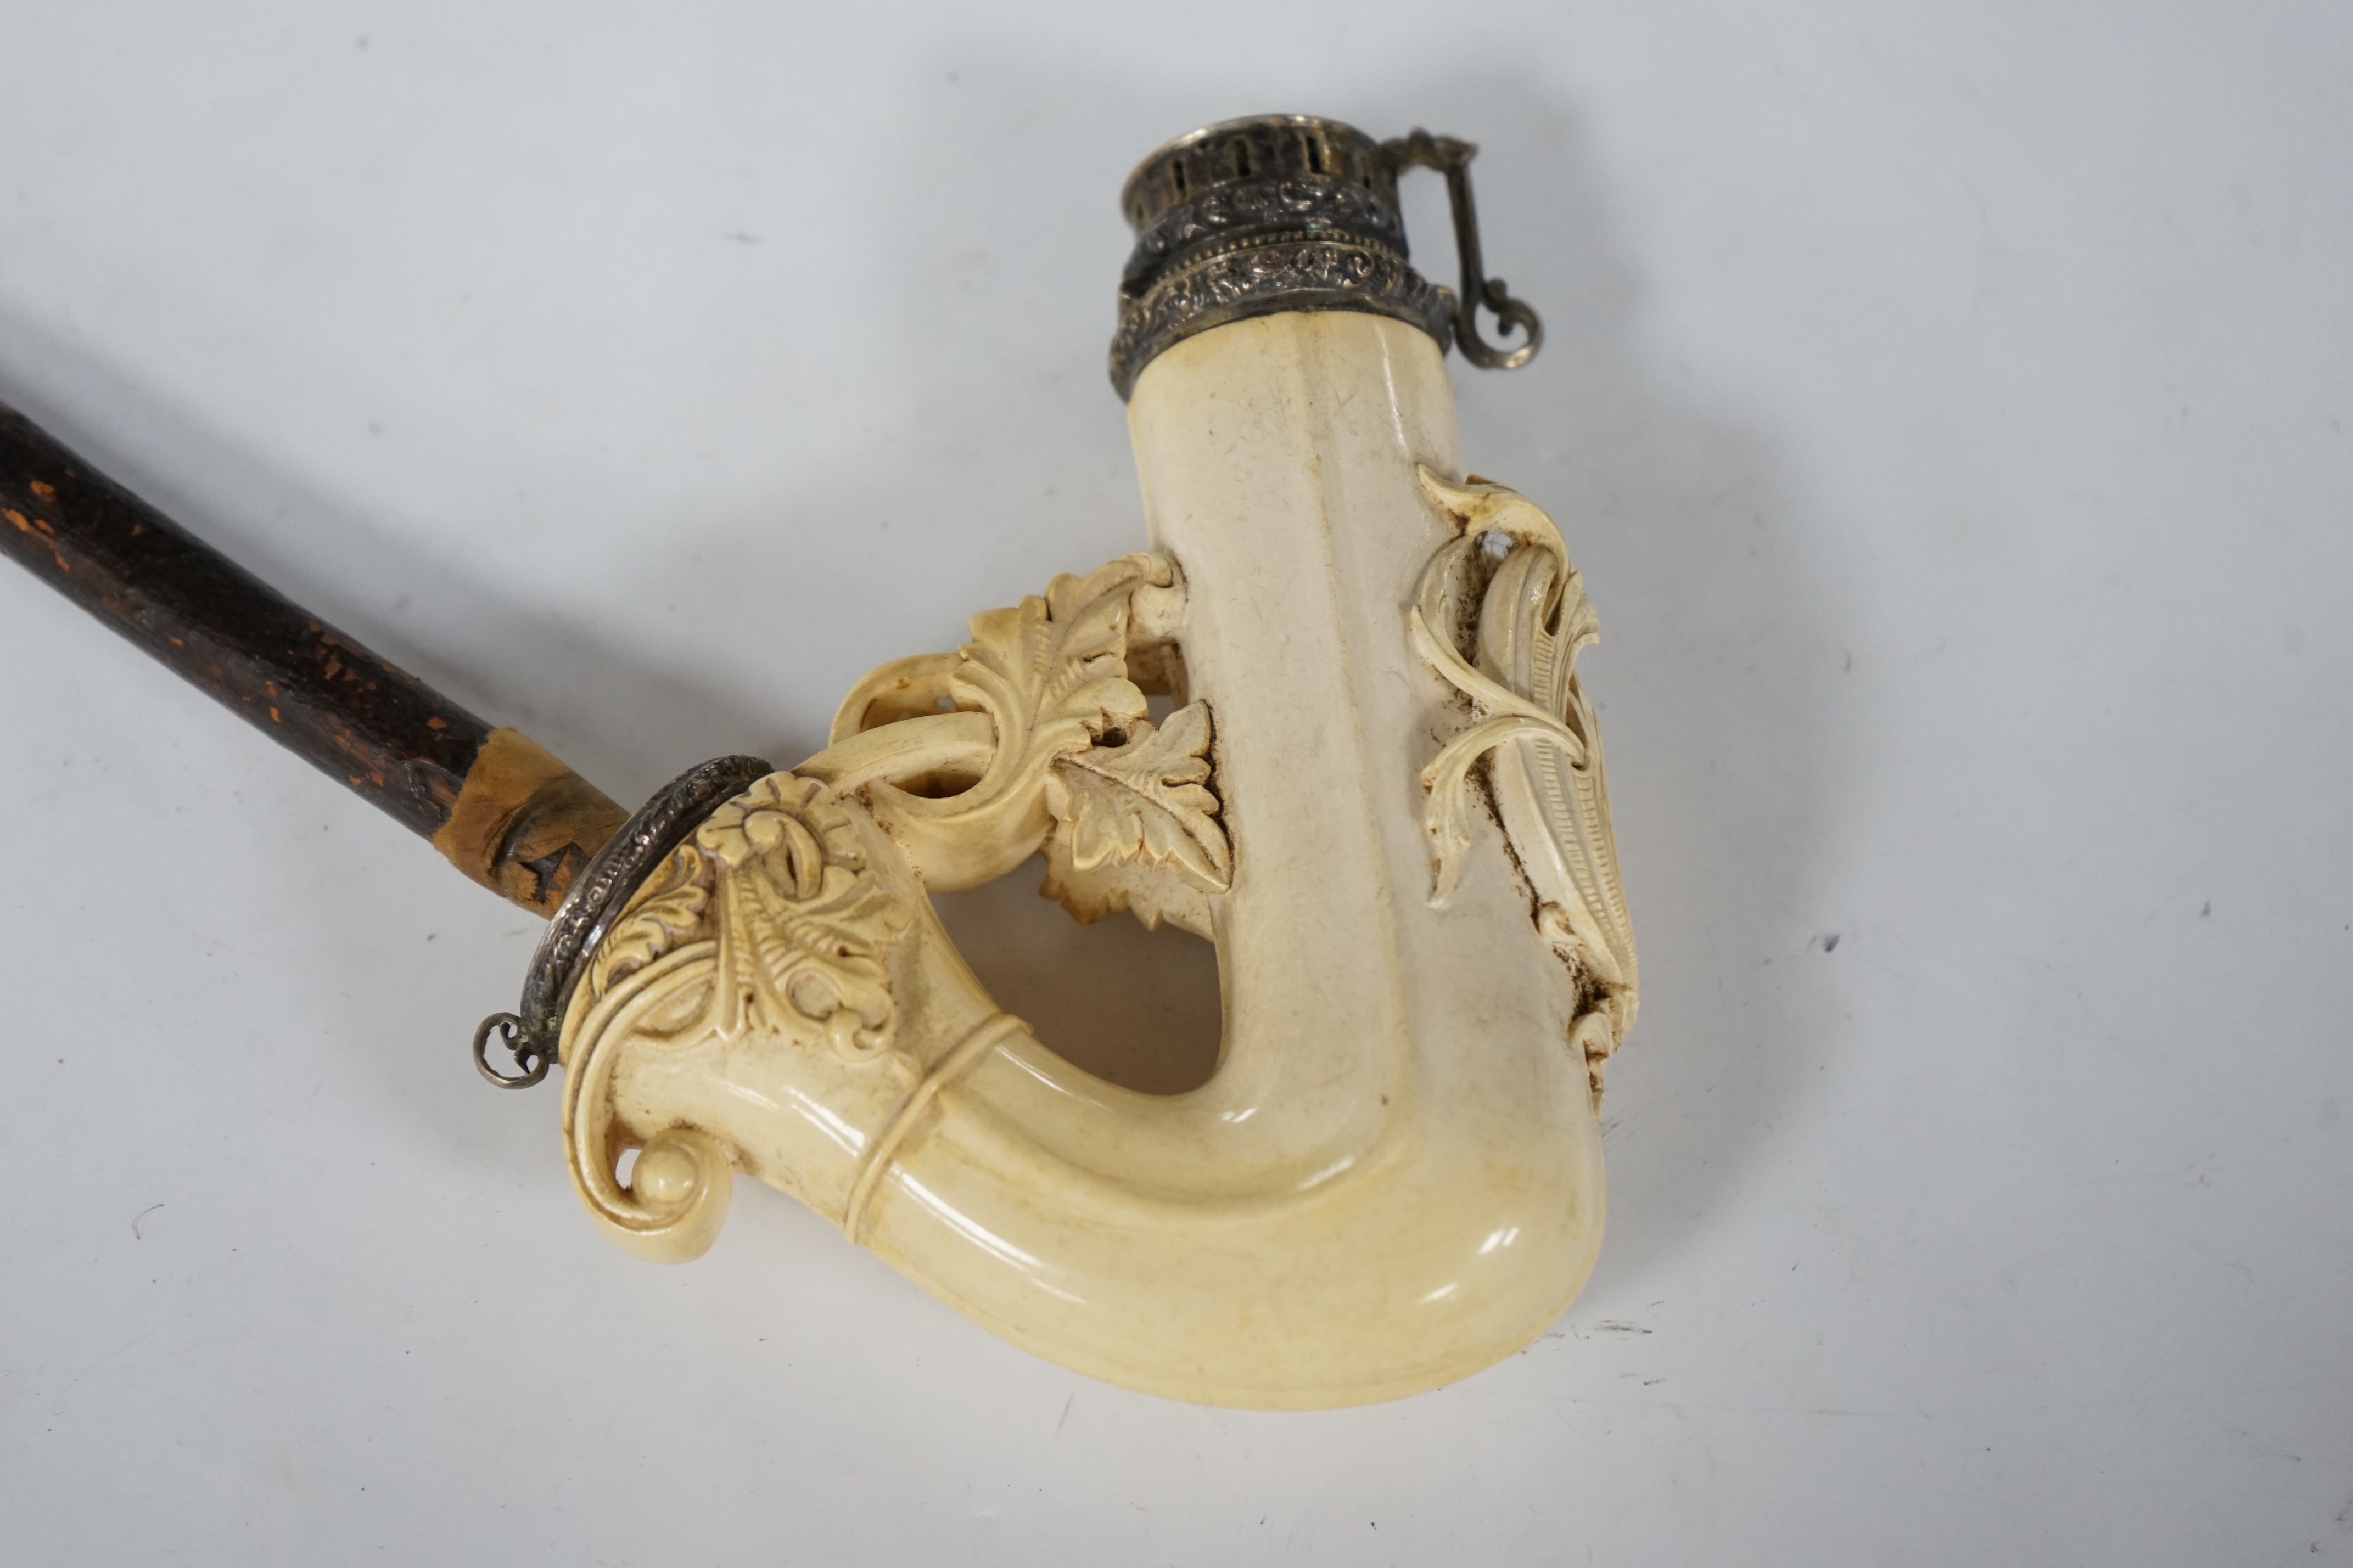 An ornate Meerschaum pipe, with carved monogram on the bowl and metal cover, 30cm long